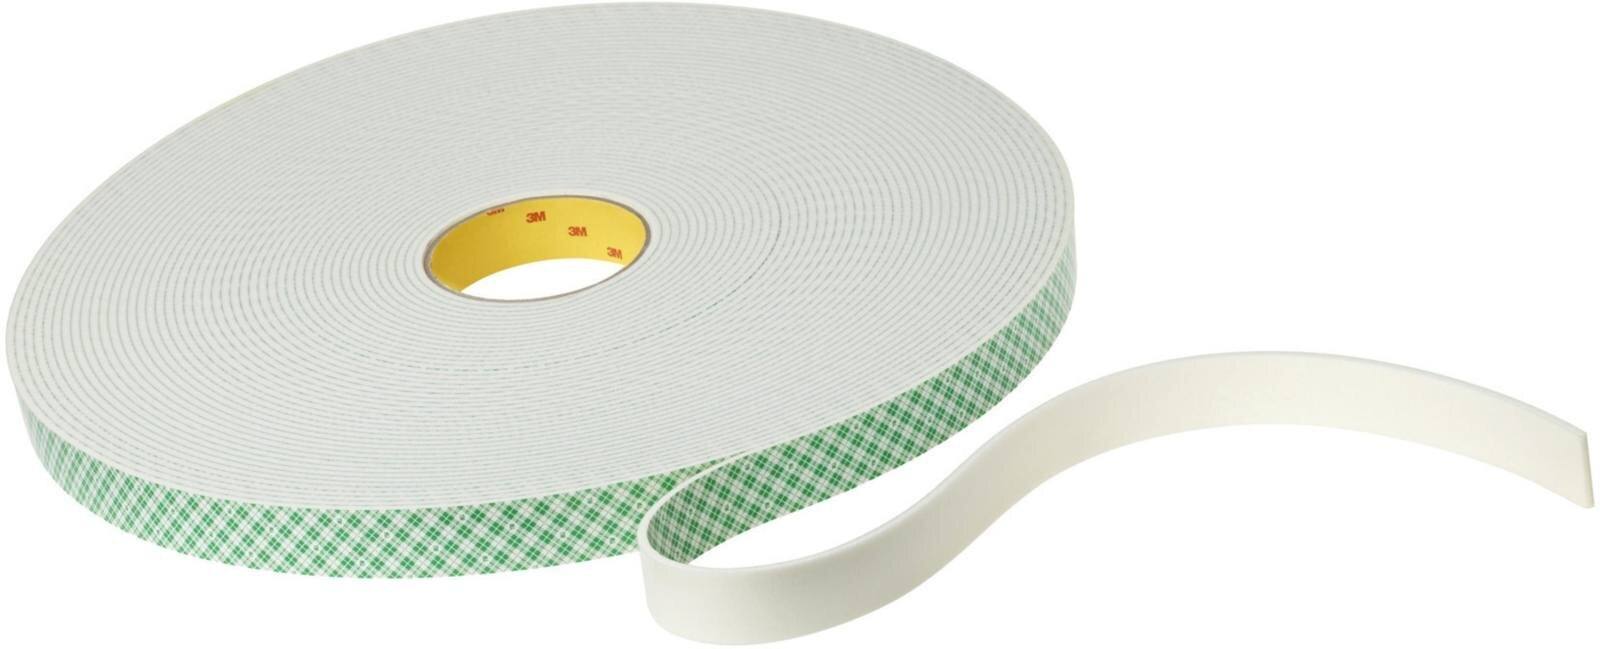 3M PU foam adhesive tape with acrylic adhesive 4026, beige, 1200 mm x 33 m, 1.6 mm